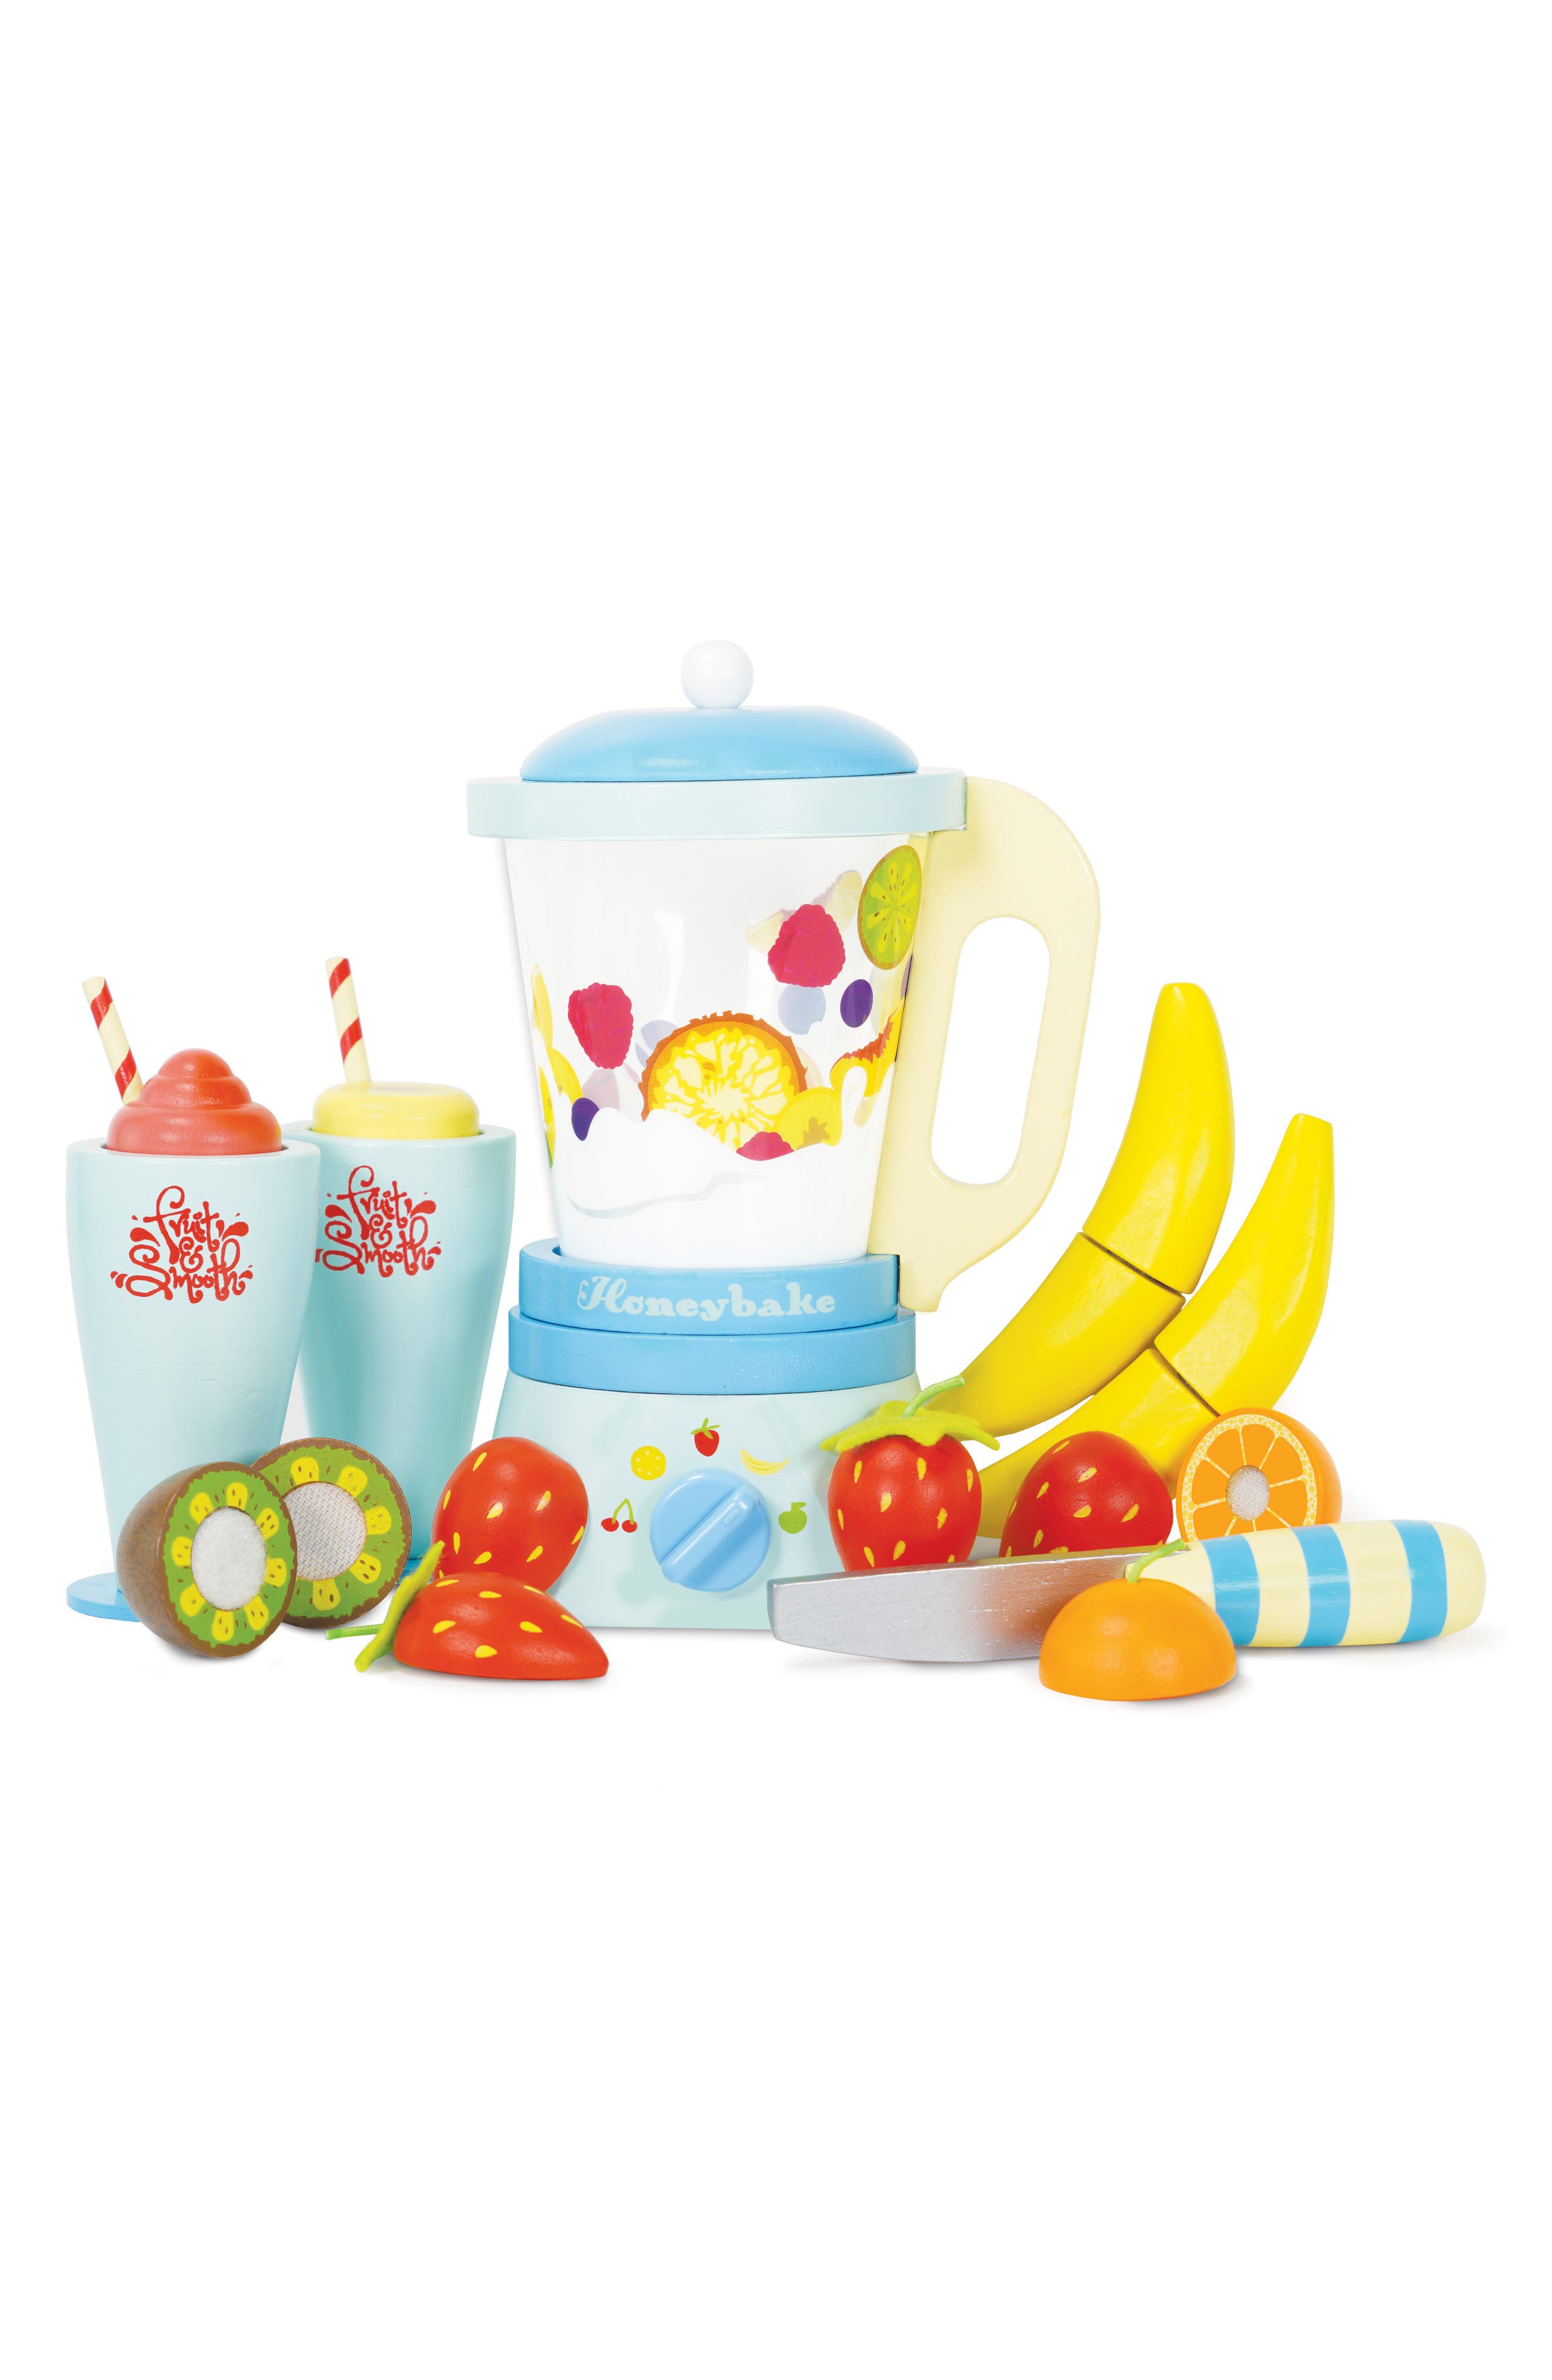 Le Toy Van Fruit & Smoothie Blender Toy Set in White Blue Yellow And Red